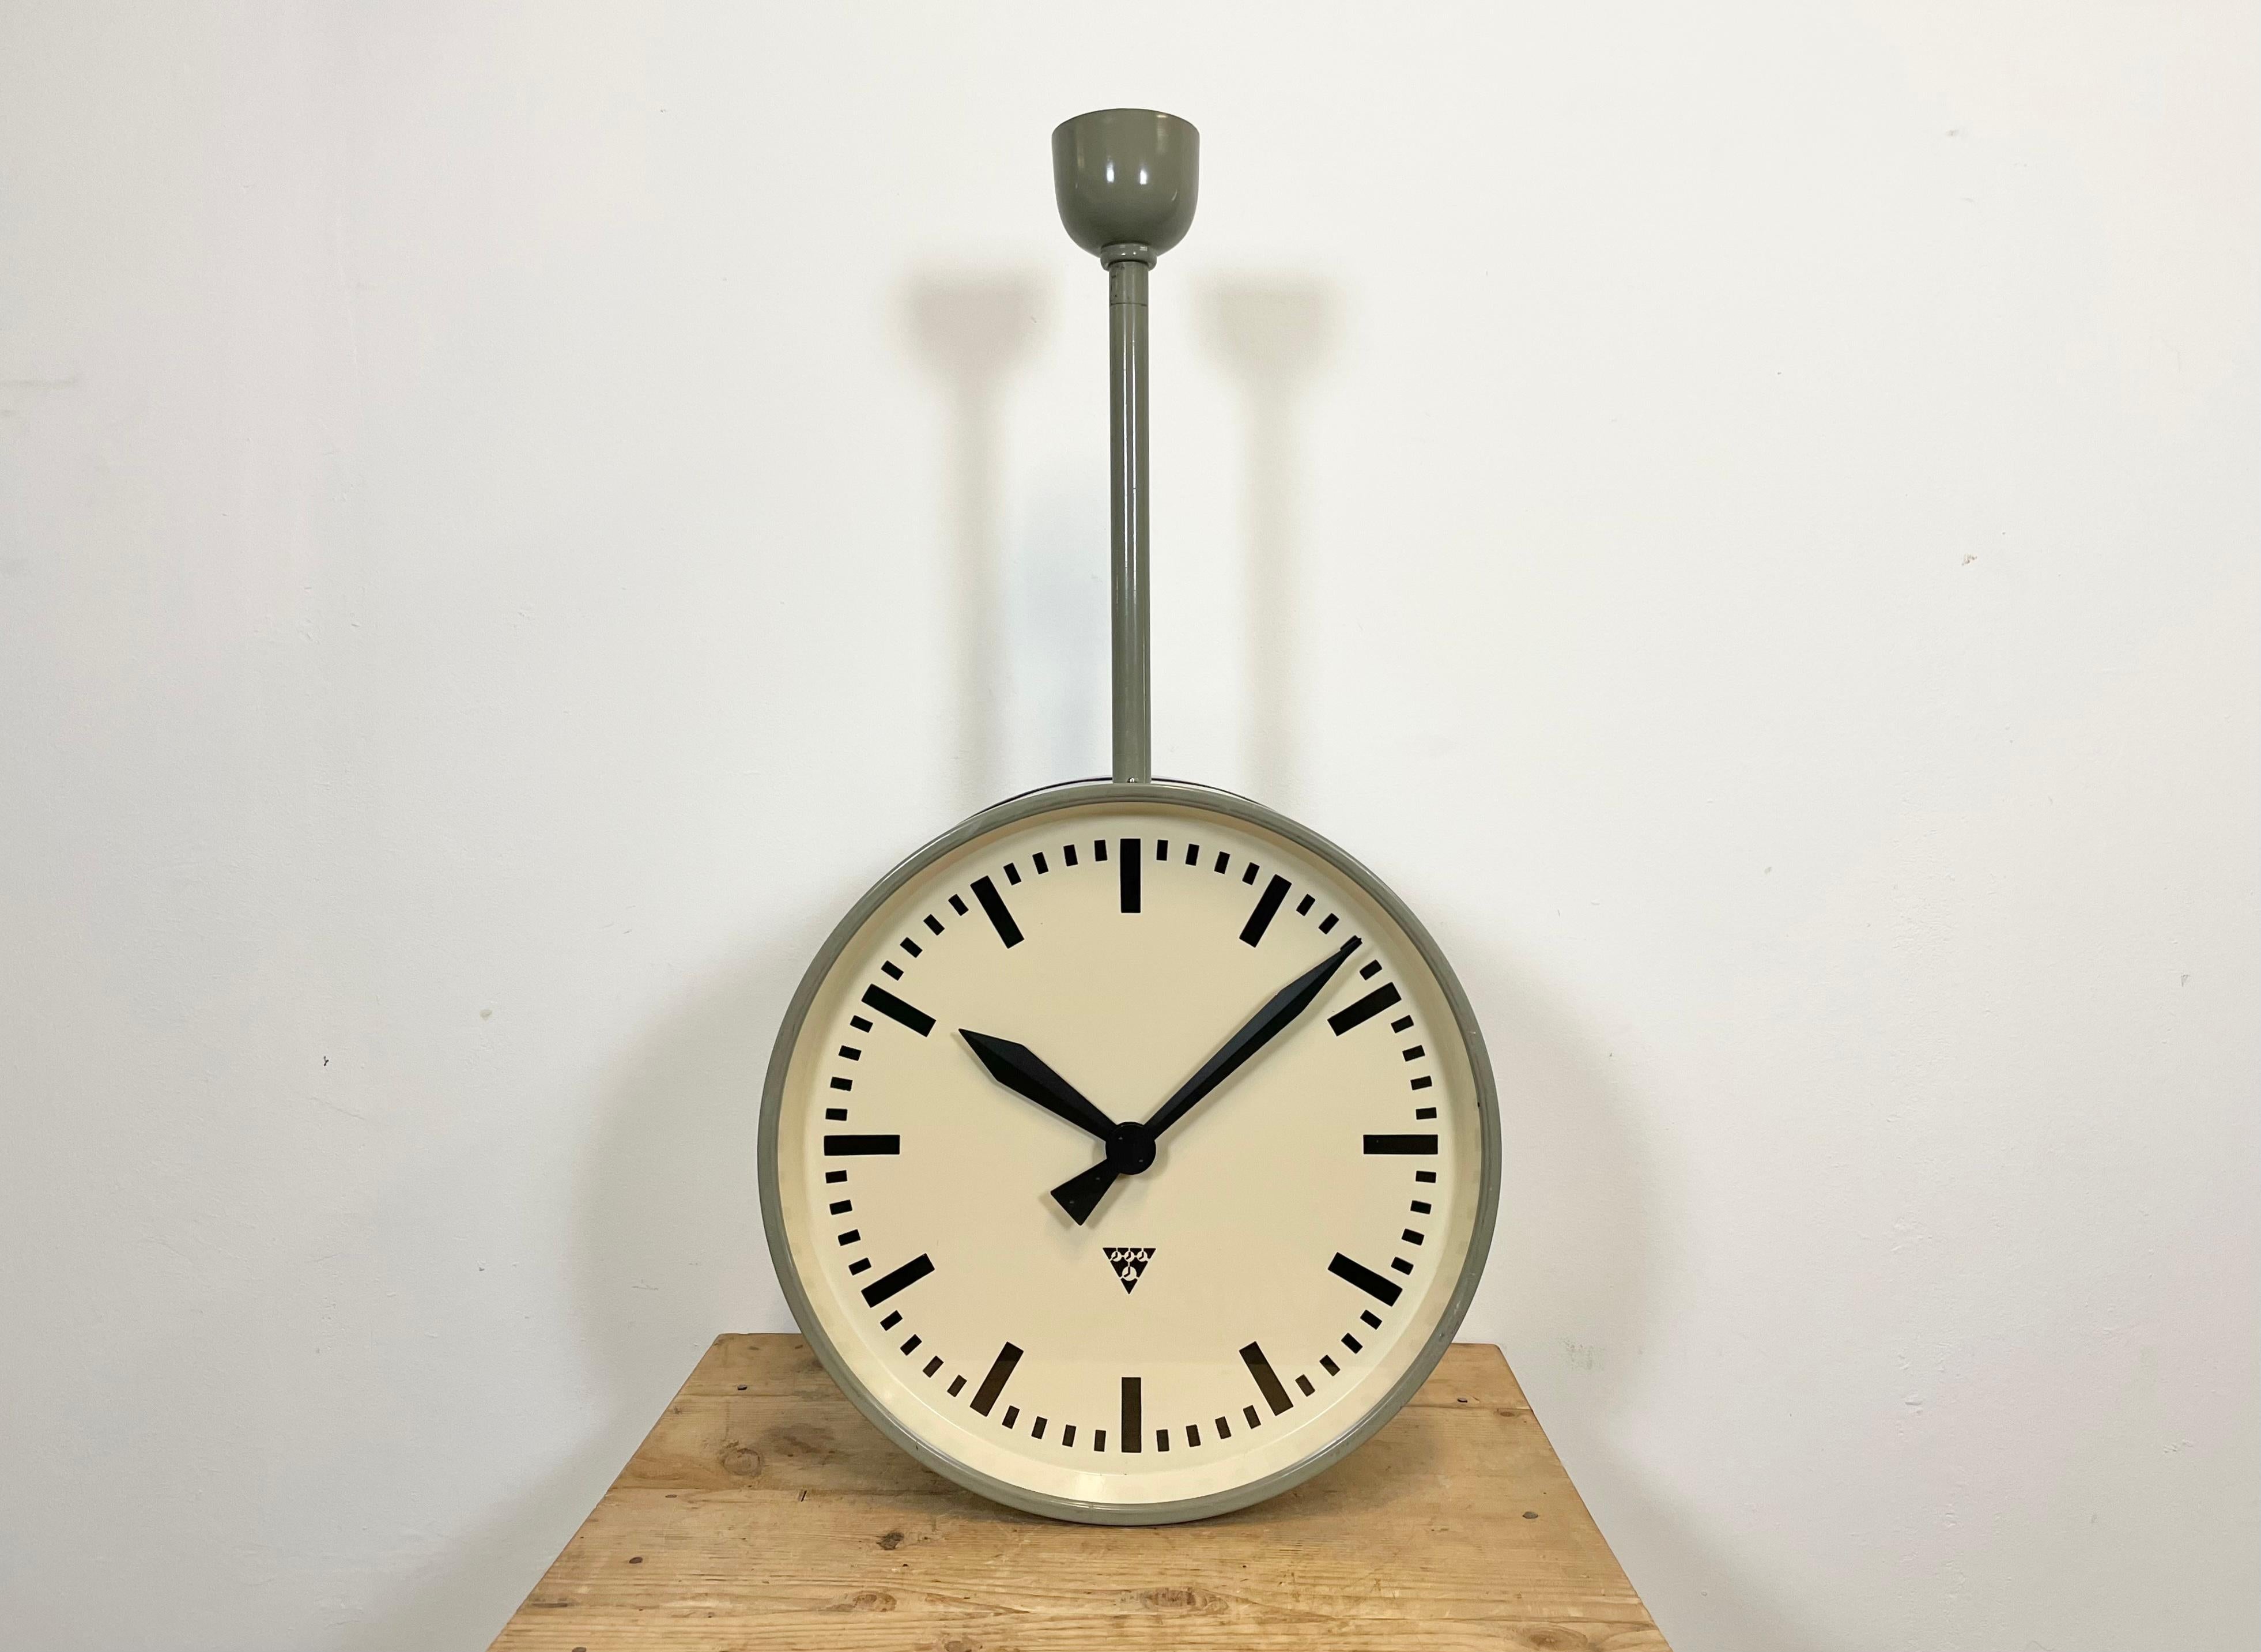 Czech Large Industrial Double Sided Railway or Factory Clock from Pragotron, 1950s